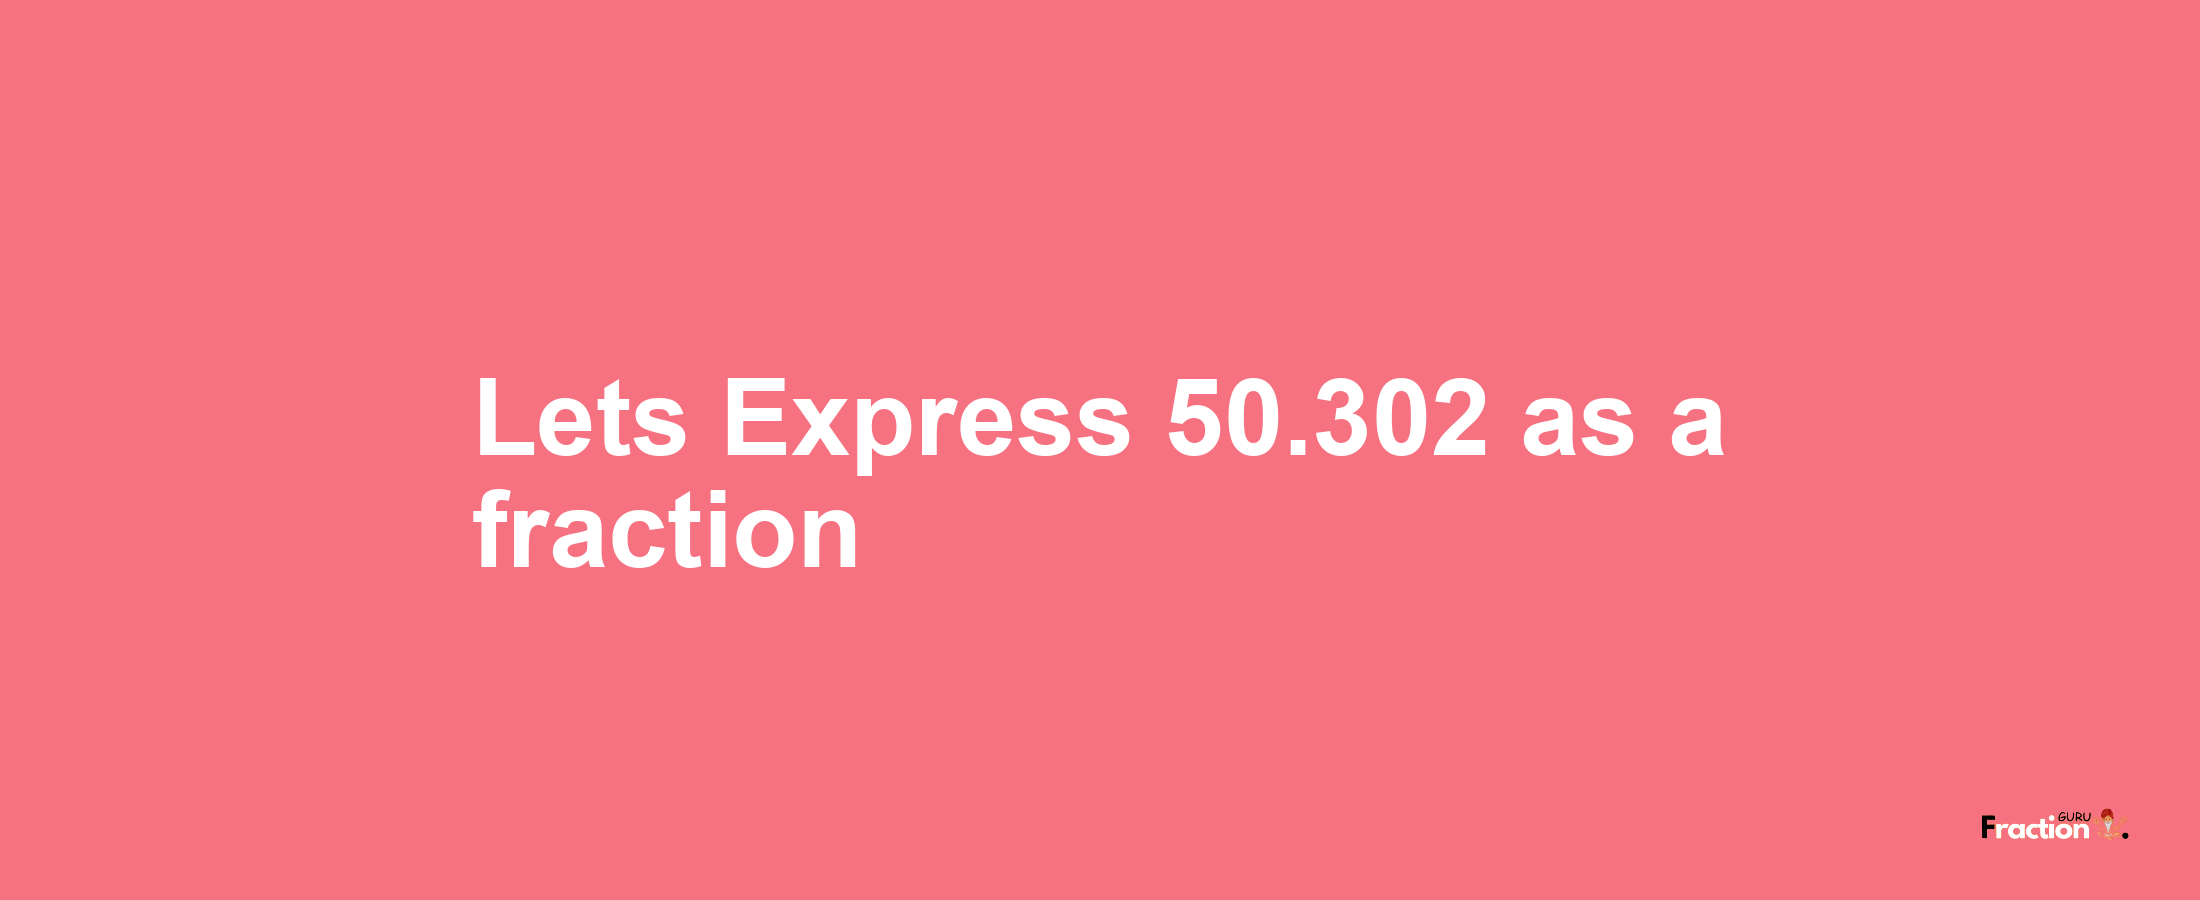 Lets Express 50.302 as afraction